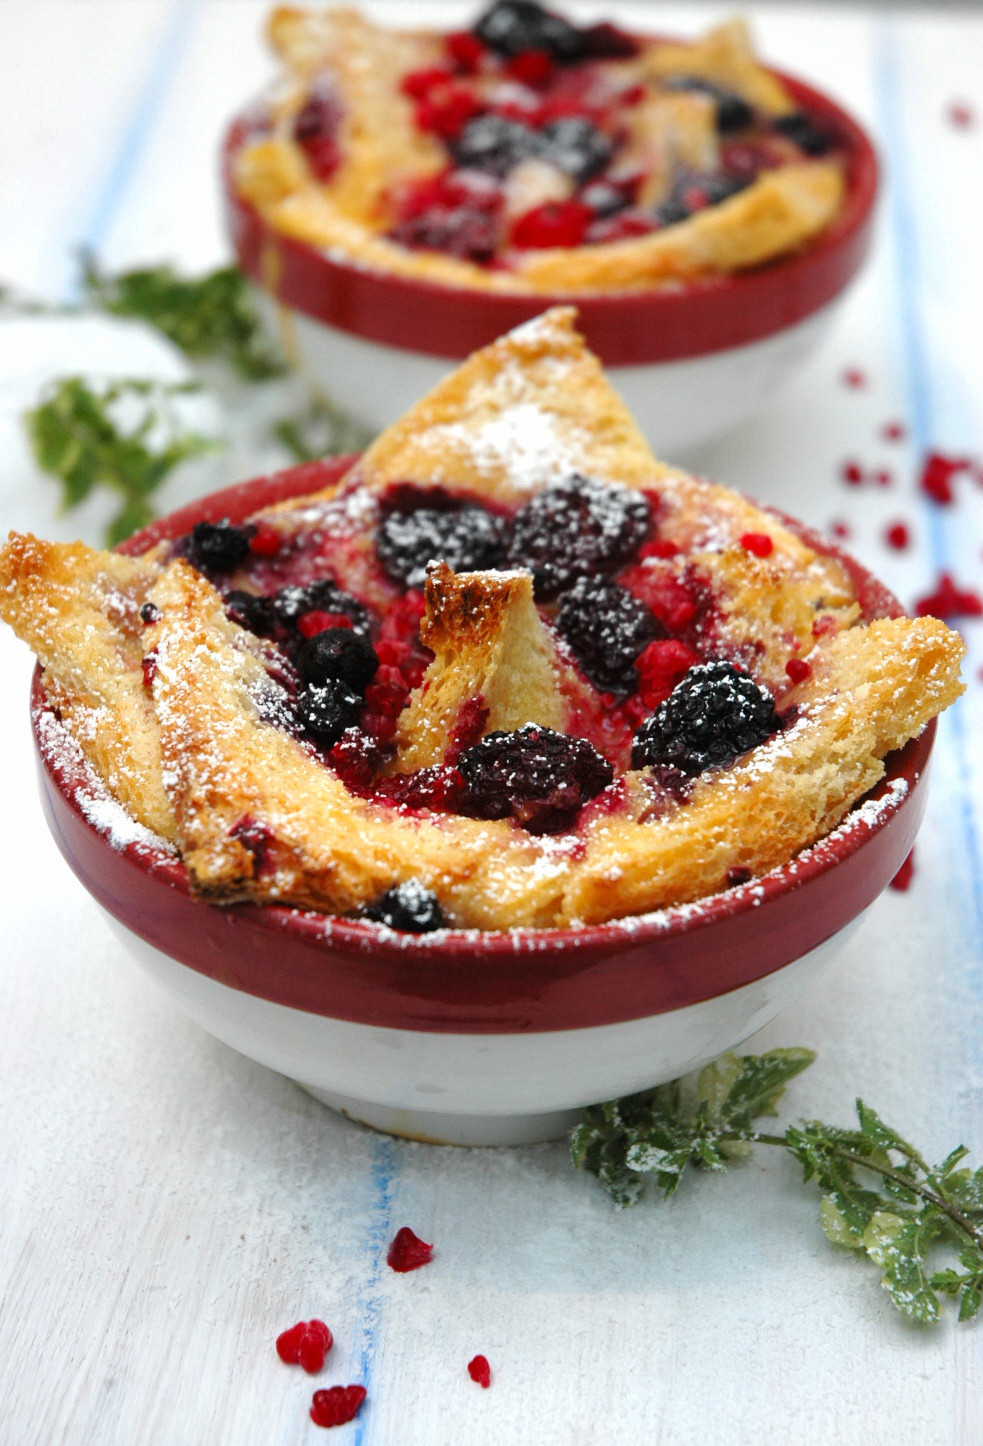 Bread Pudding Dessert
 Bread Pudding with Berries in Winter My Easy Cooking